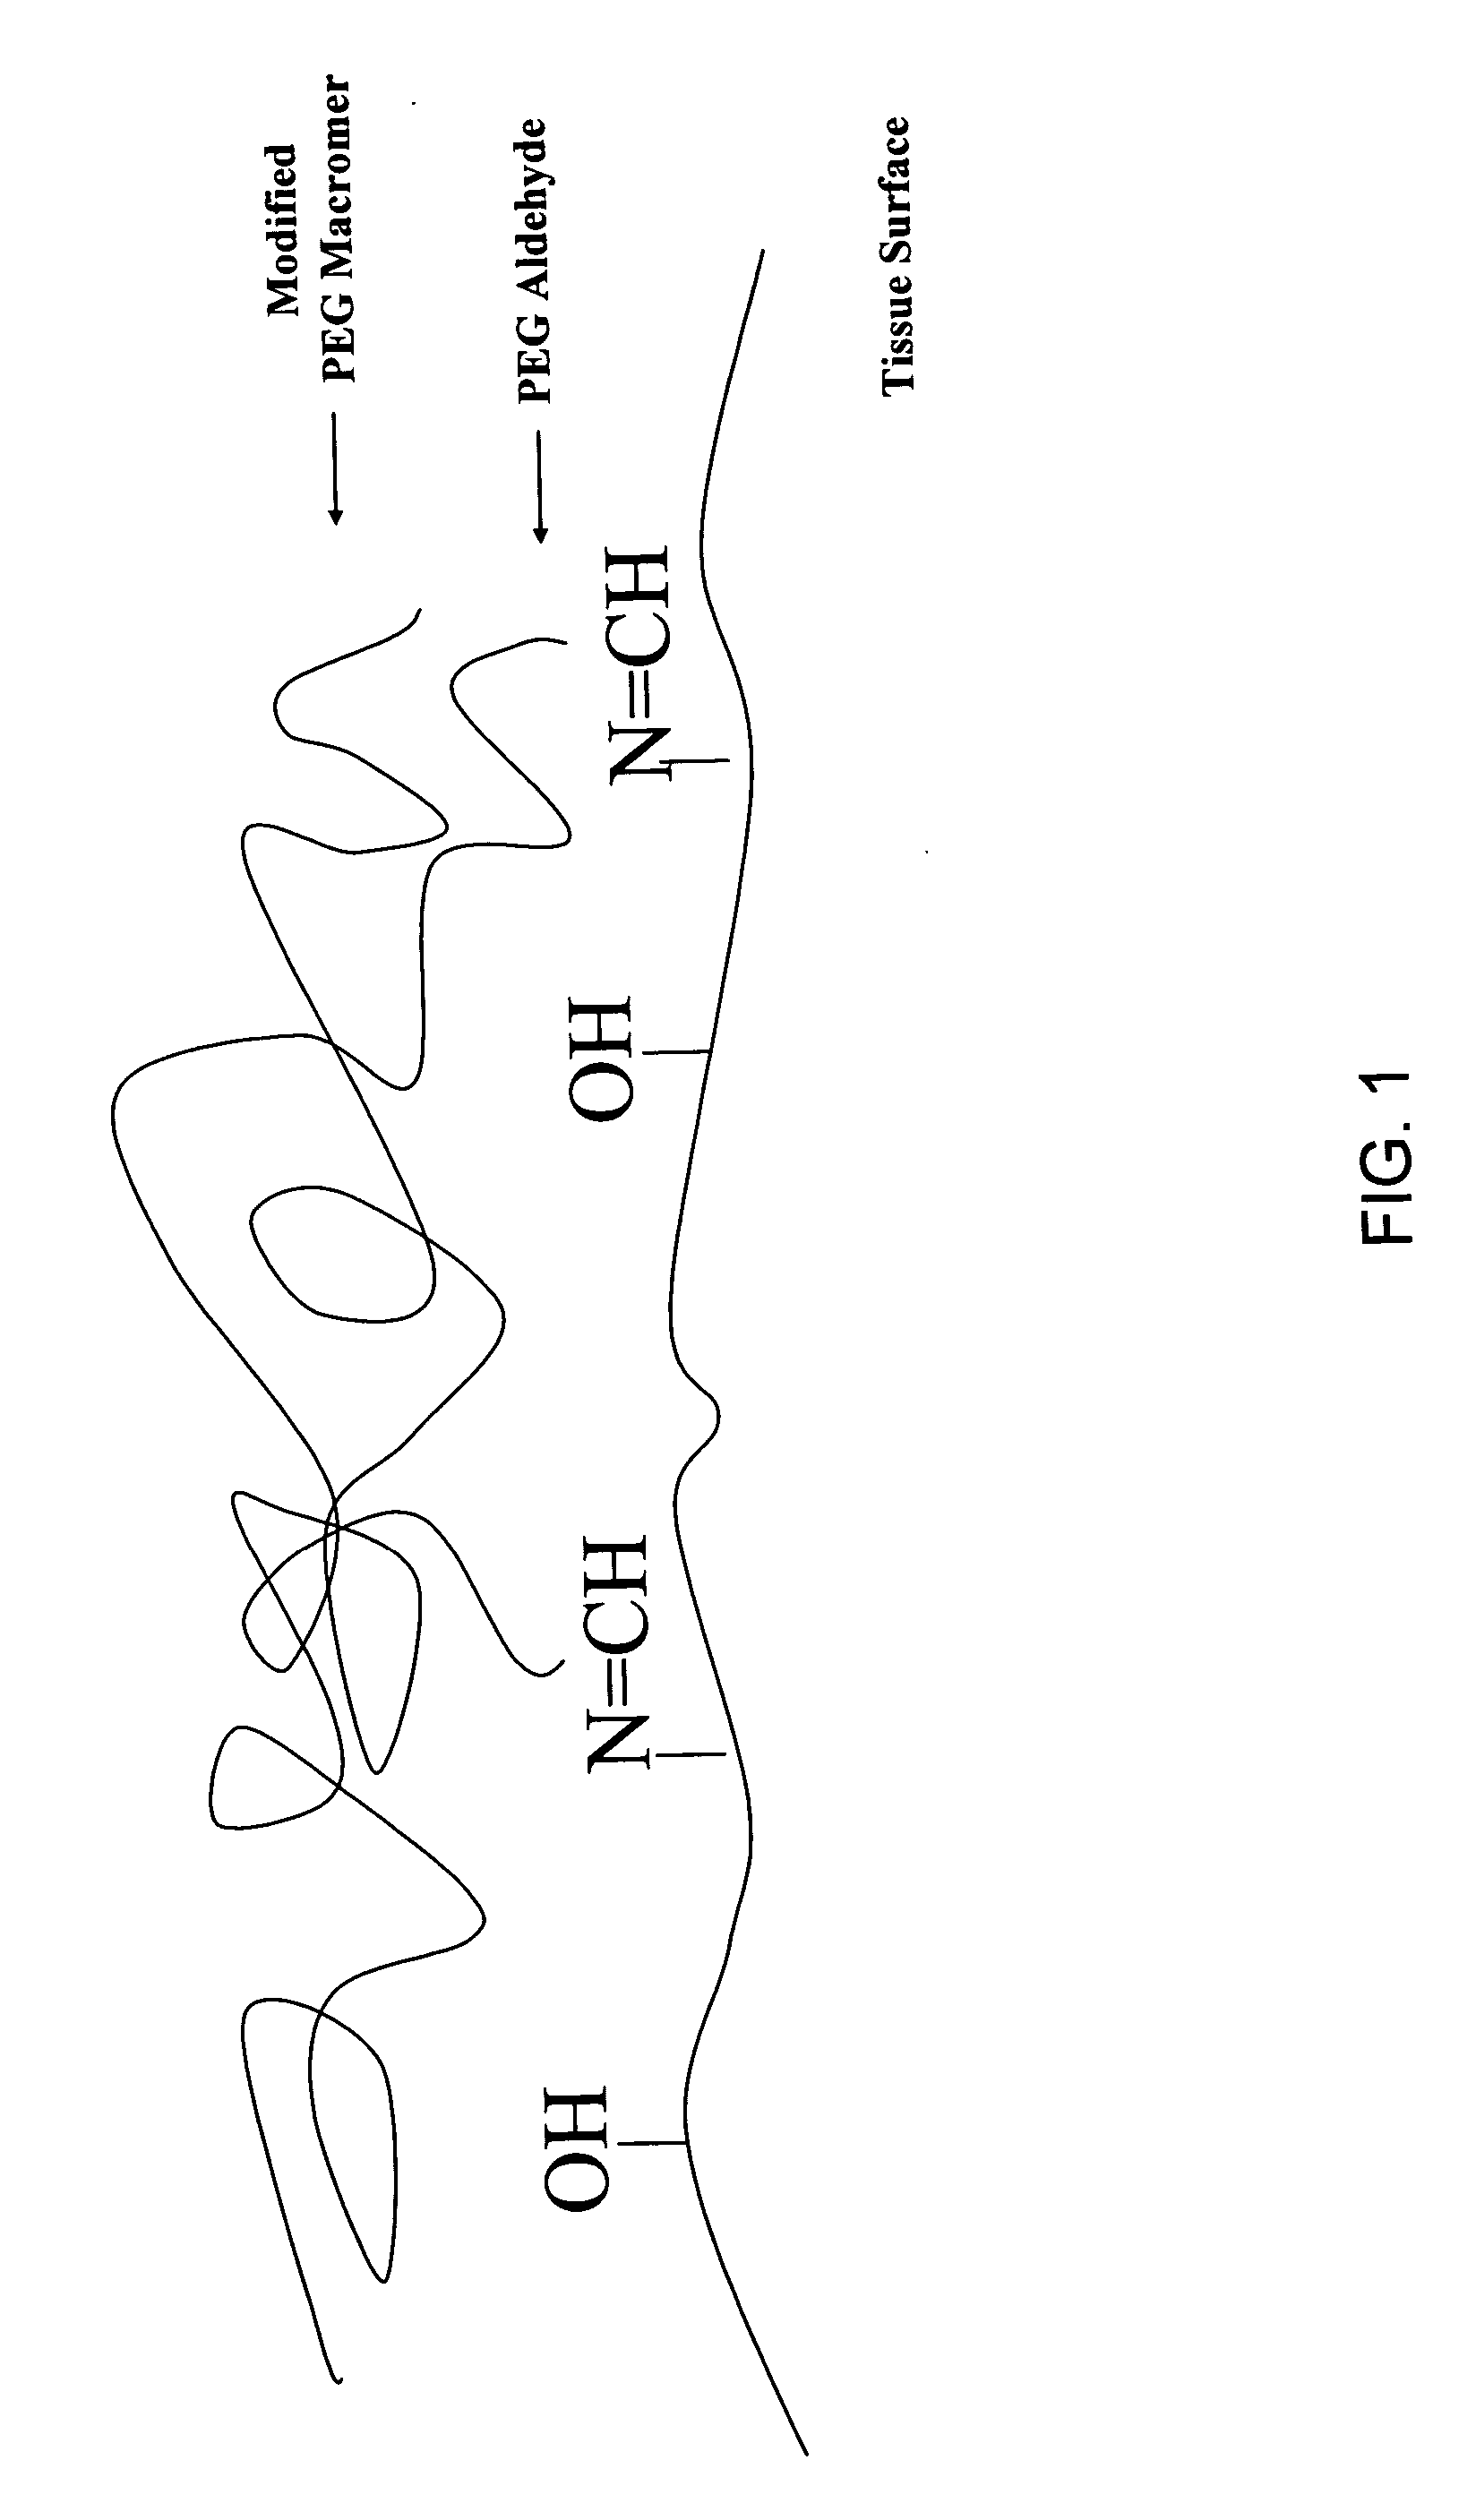 Adherent polymeric compositions